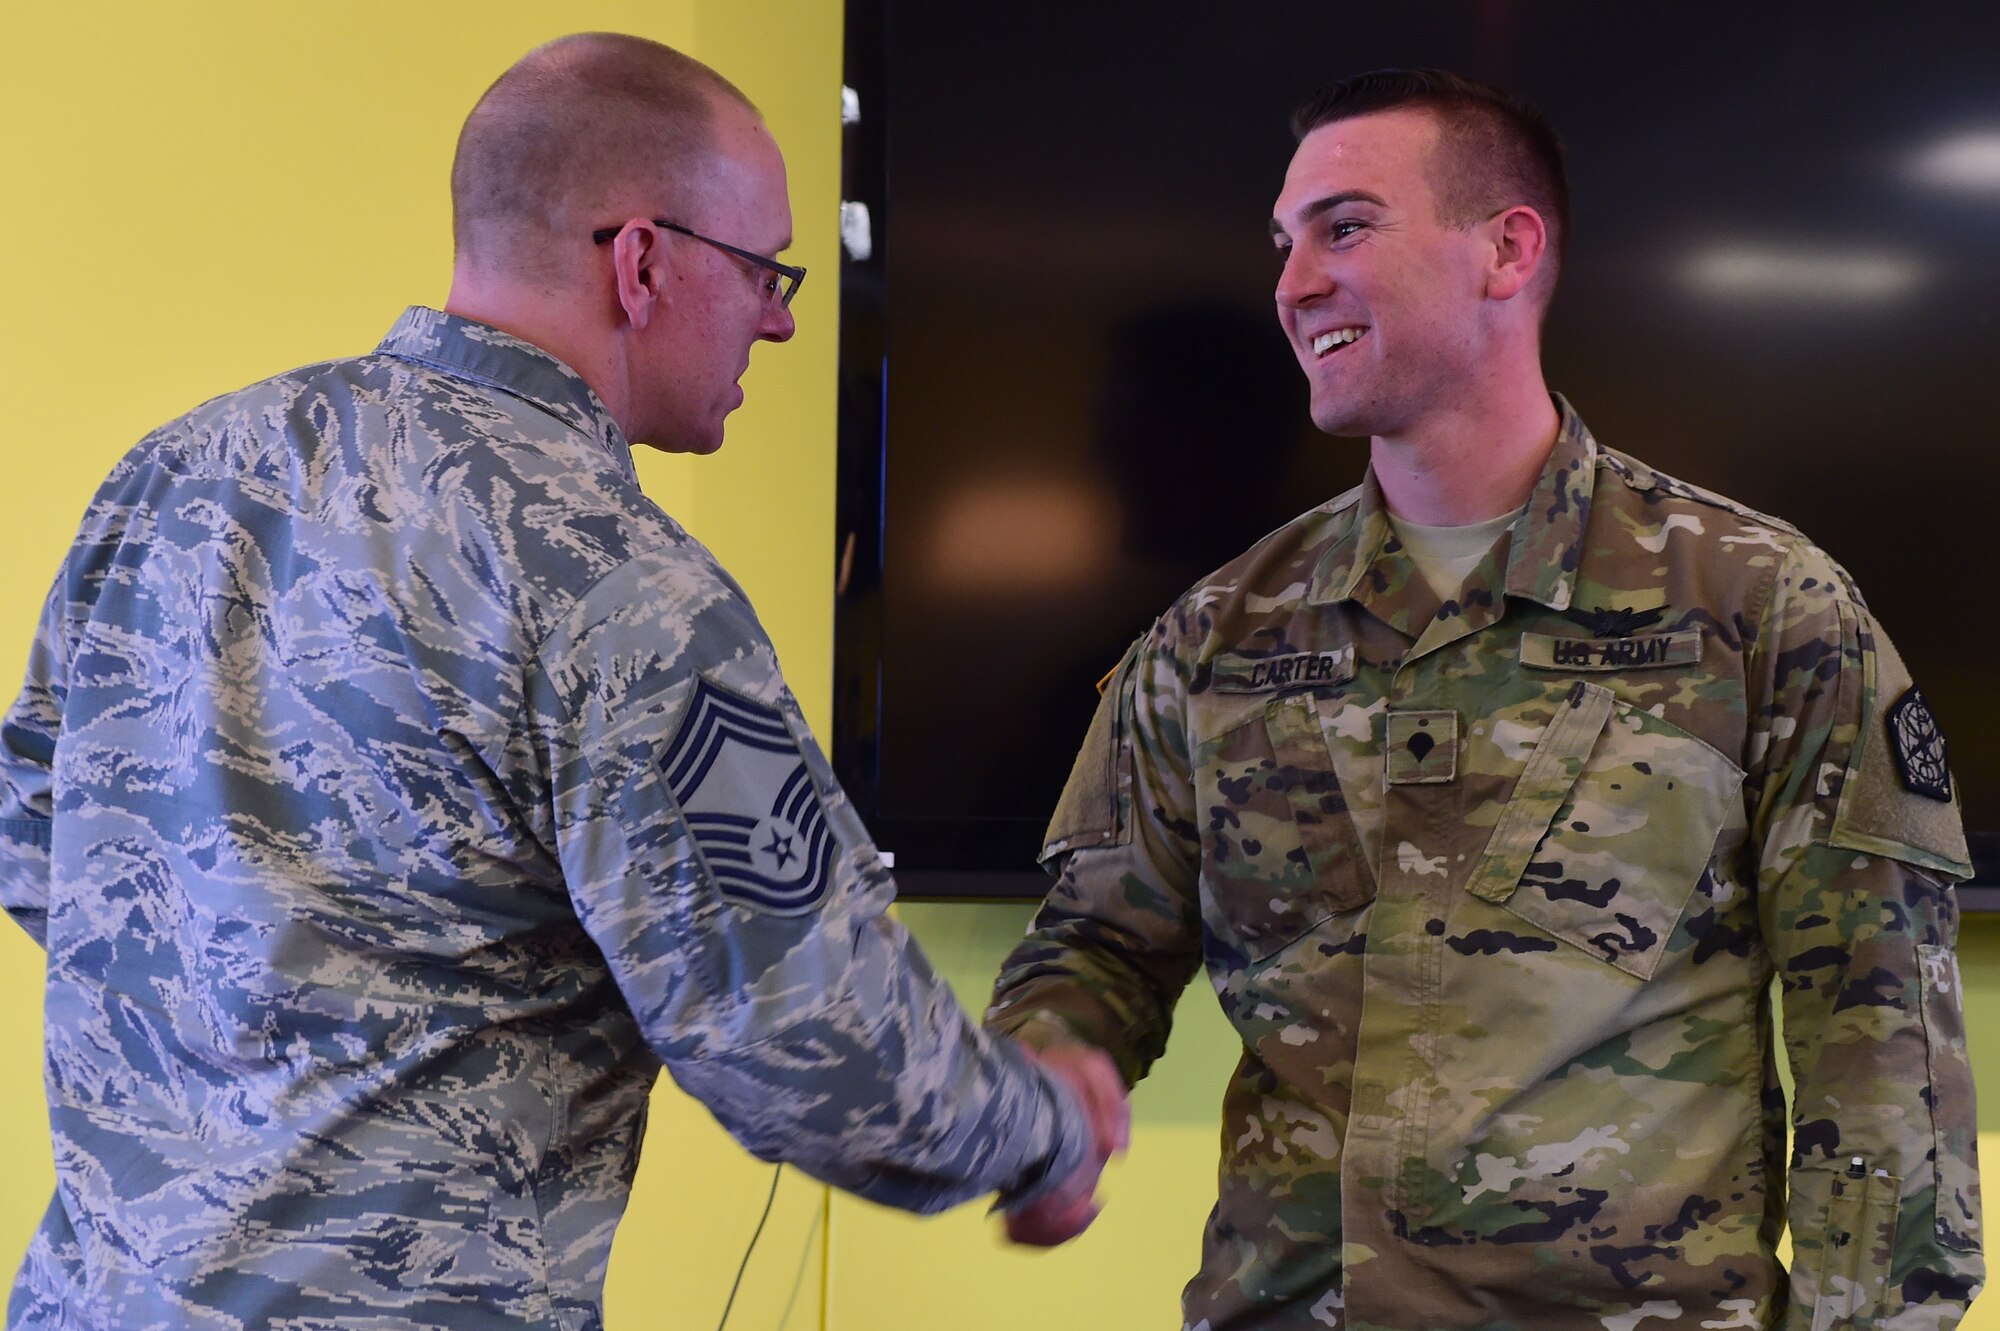 U.S. Air Force Chief Master Sgt. Richard Halseth, Team Buckley Chief’s Group member, shakes hands with U.S. Army Spc. Brian Carter, 743d Military Intelligence Battalion analyst, at the Panther Den Feb. 18, 2016, on Buckley Air Force Base, Colo. Carter was recognized by the Team Buckley Chief’s Group for going above and beyond the call of duty. (U.S. Air Force photo by Senior Airman Racheal E. Watson/Released) 